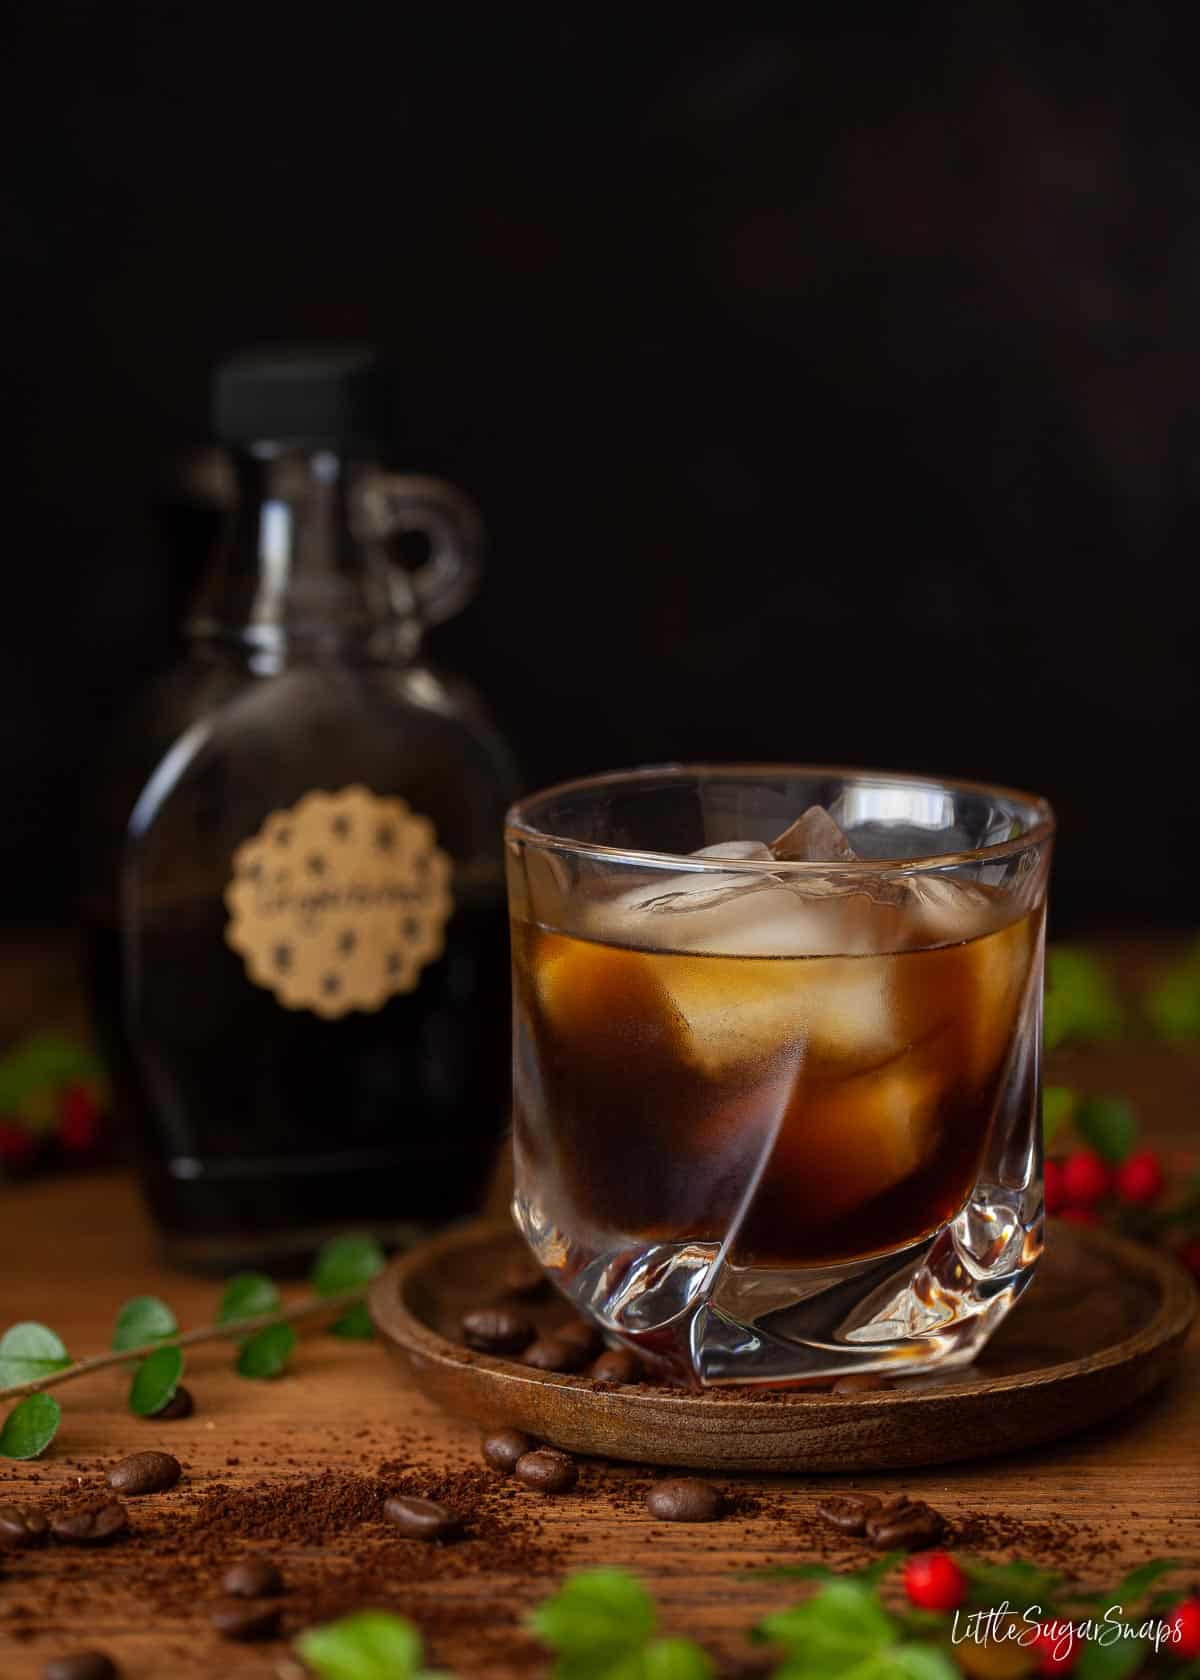 A bottle of gingerbread syrup and a kahlua cocktail served over ice.